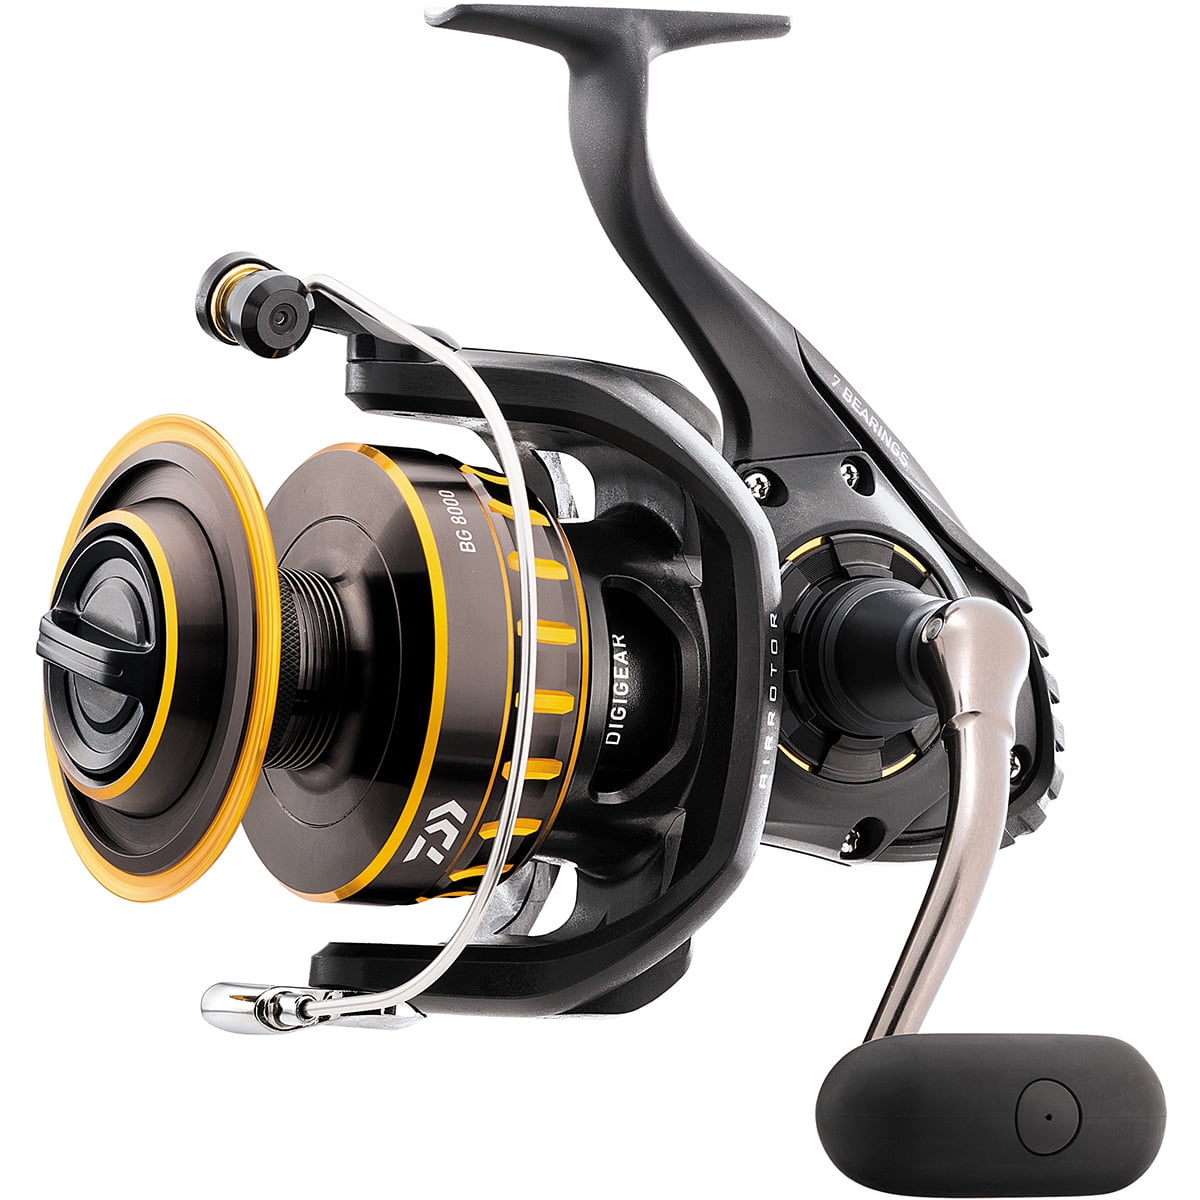 Daiwa Liberty Bass Club Reel 1500 (For Left Handed Anglers) - Lure